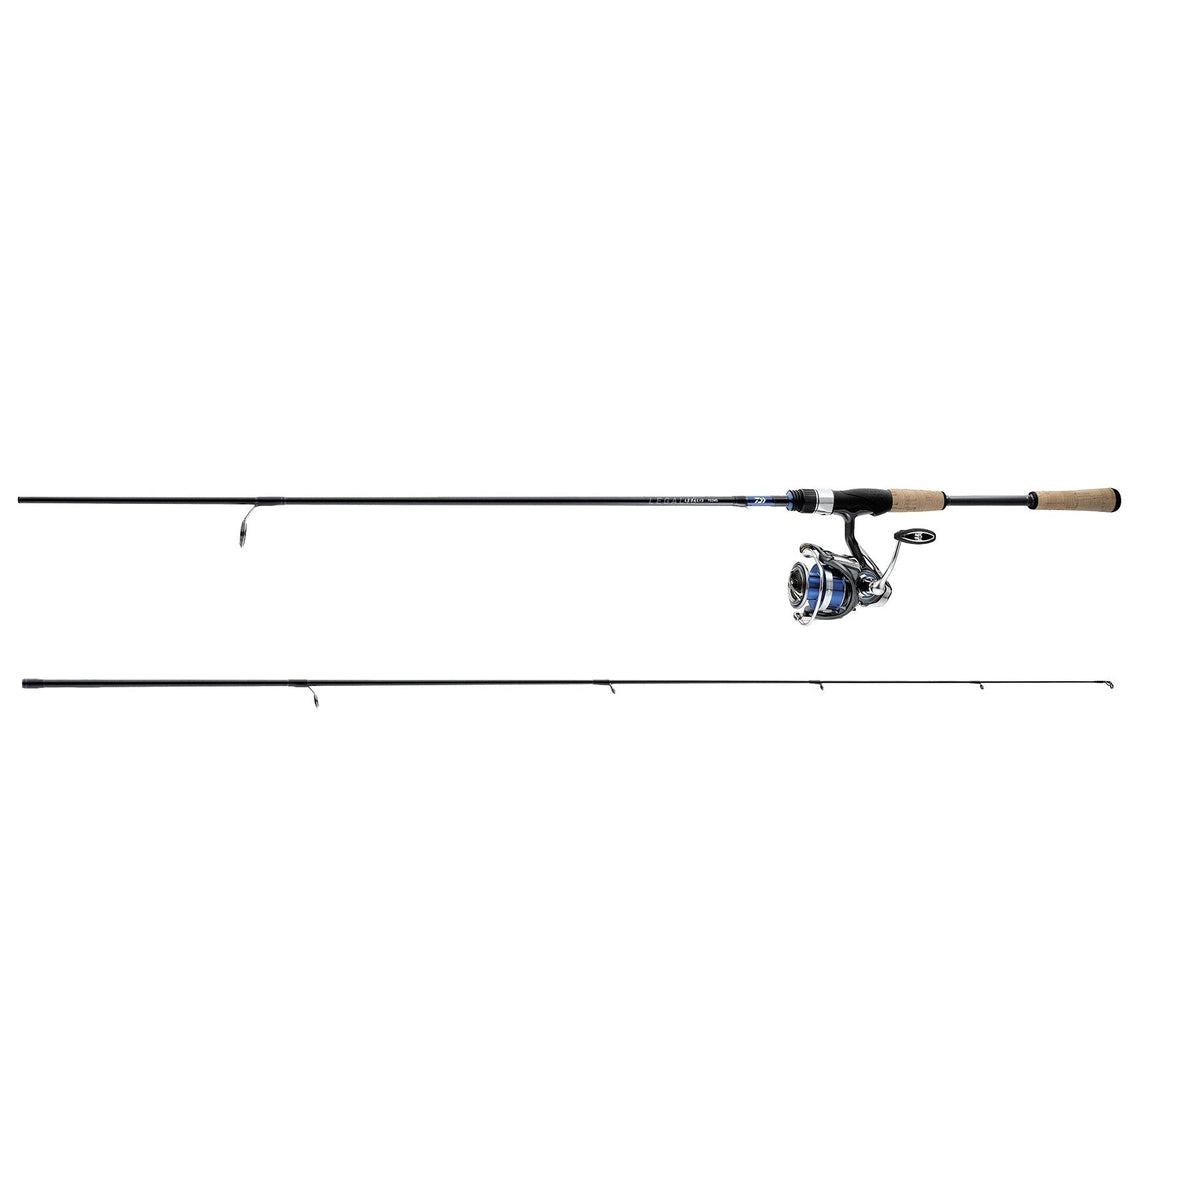 View of Spinning_Rods Daiwa LEGALIS LT Spinning Combo 7' MH available at EZOKO Pike and Musky Shop